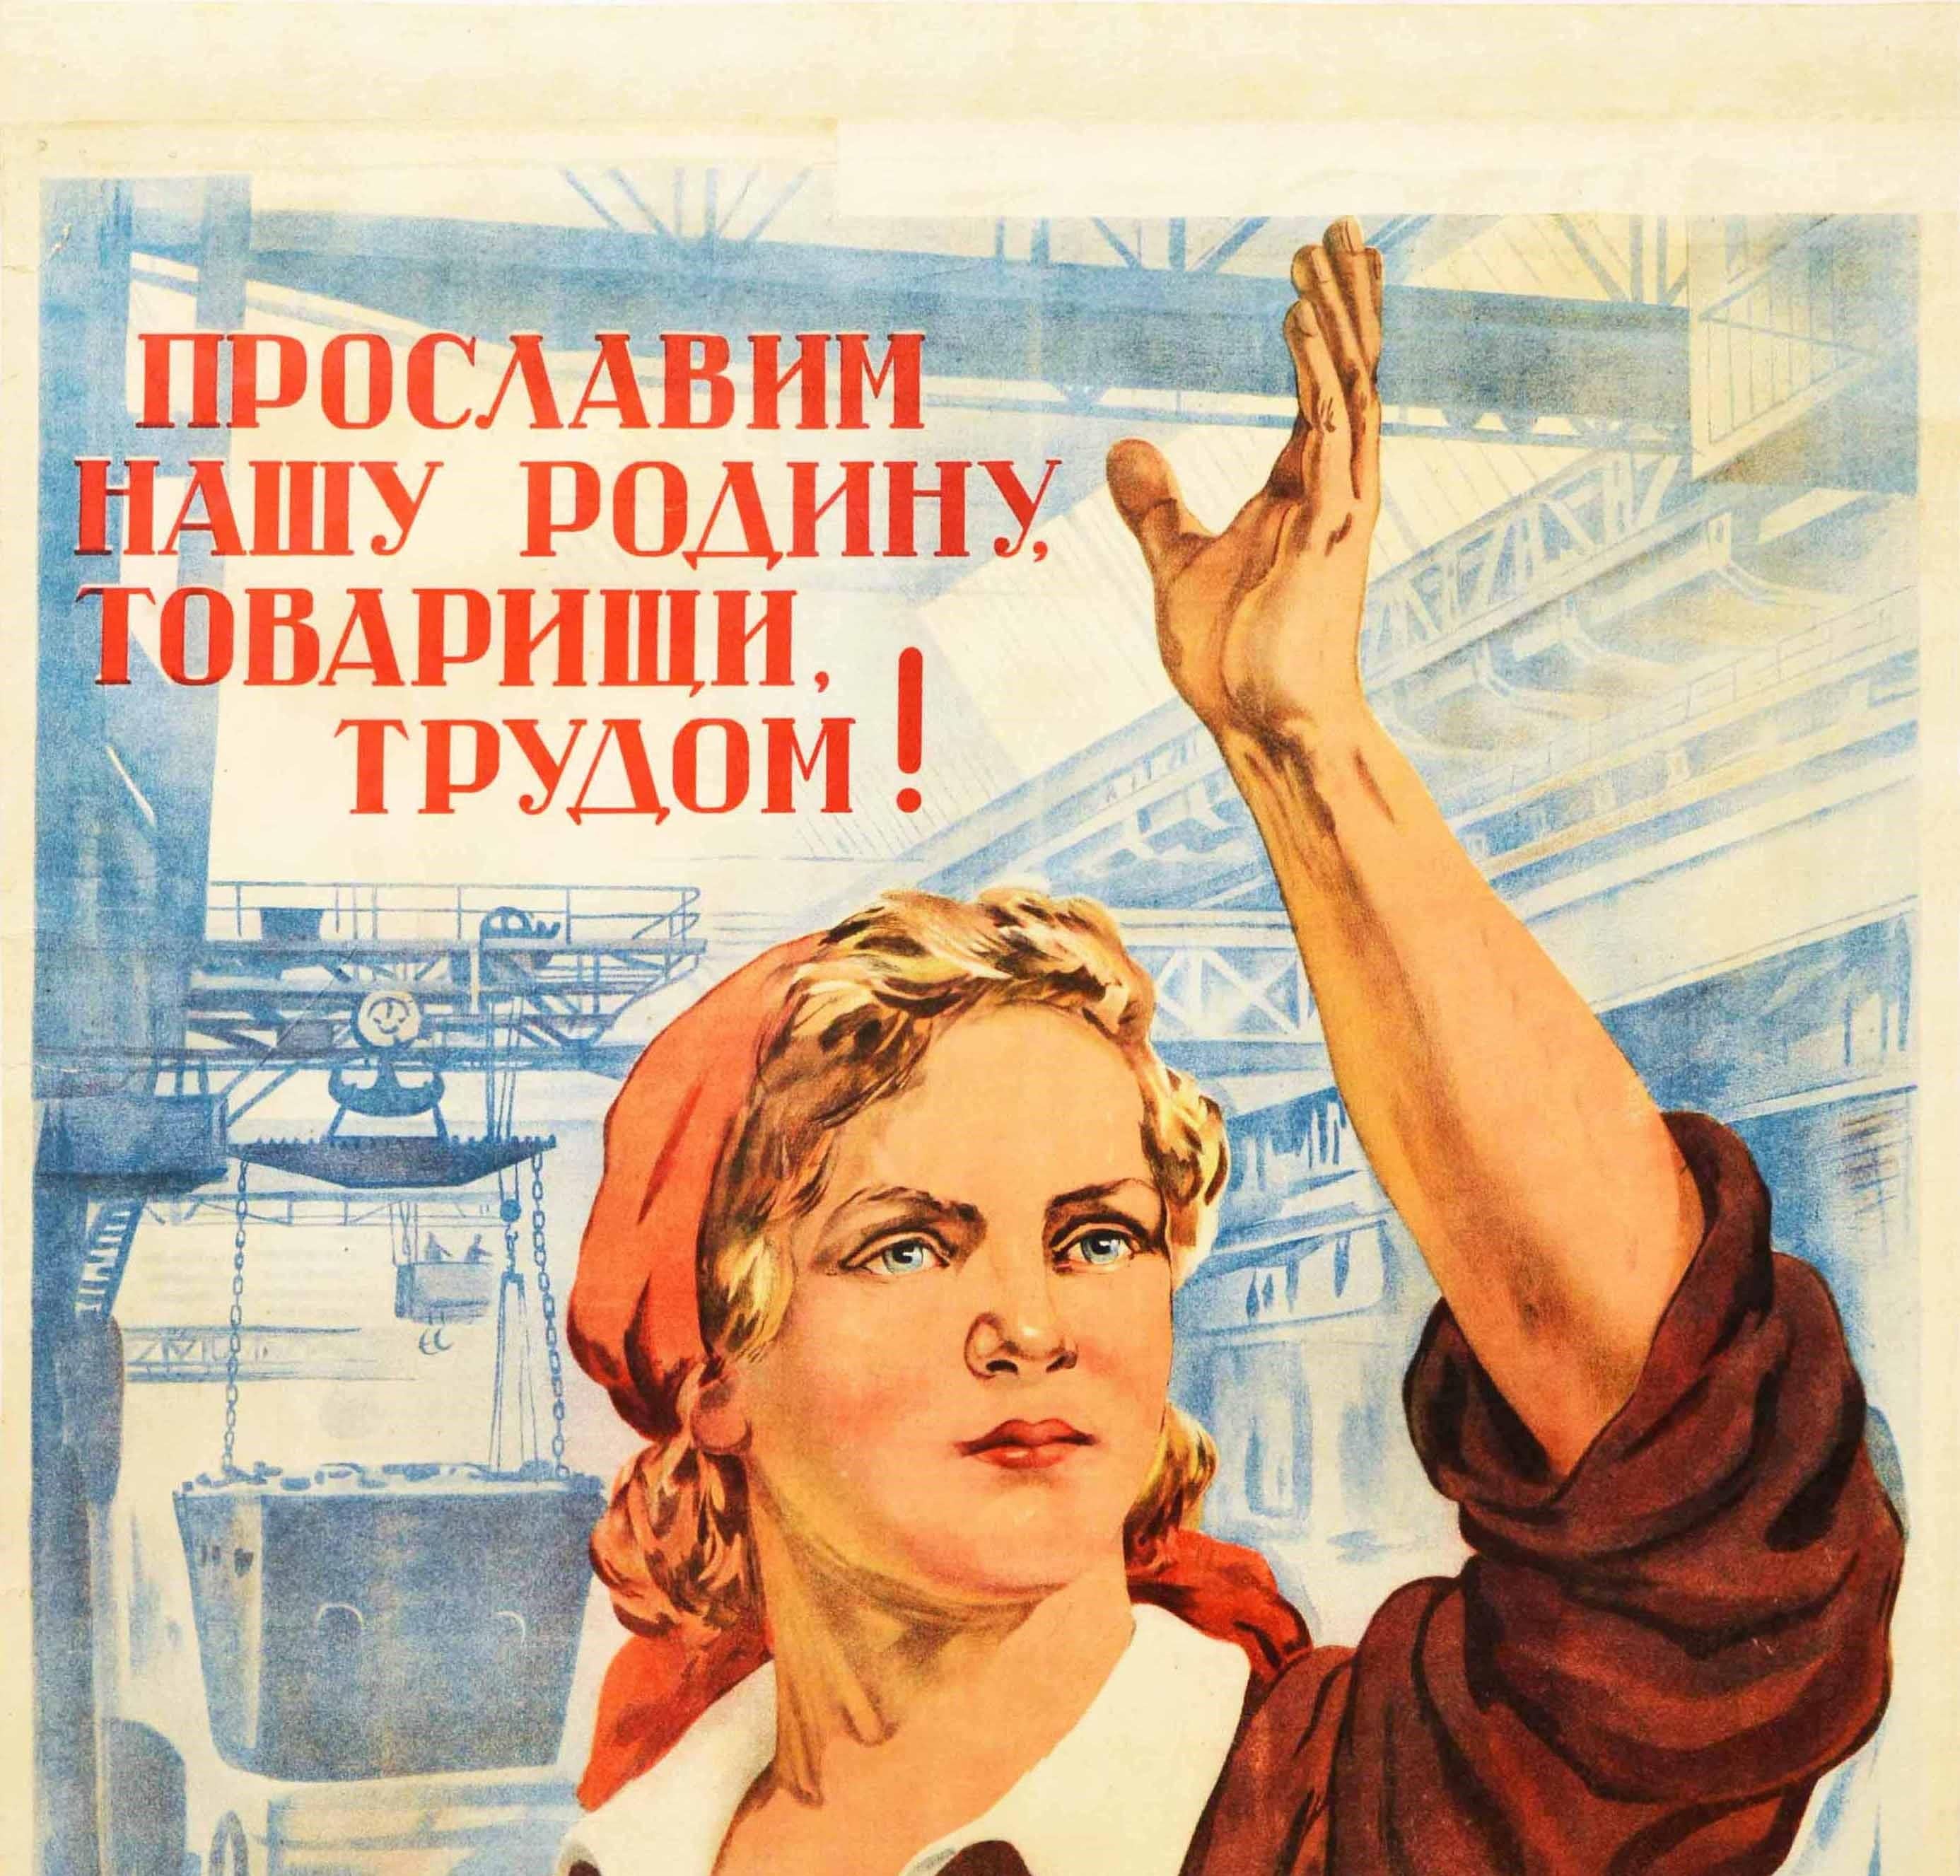 Original vintage Soviet propaganda poster - Let us glorify our homeland, comrades, with work! / ????????? ???? ??????, ????????, ??????! - featuring an illustration of a young blond lady in an apron and a headscarf holding one hand up and the other